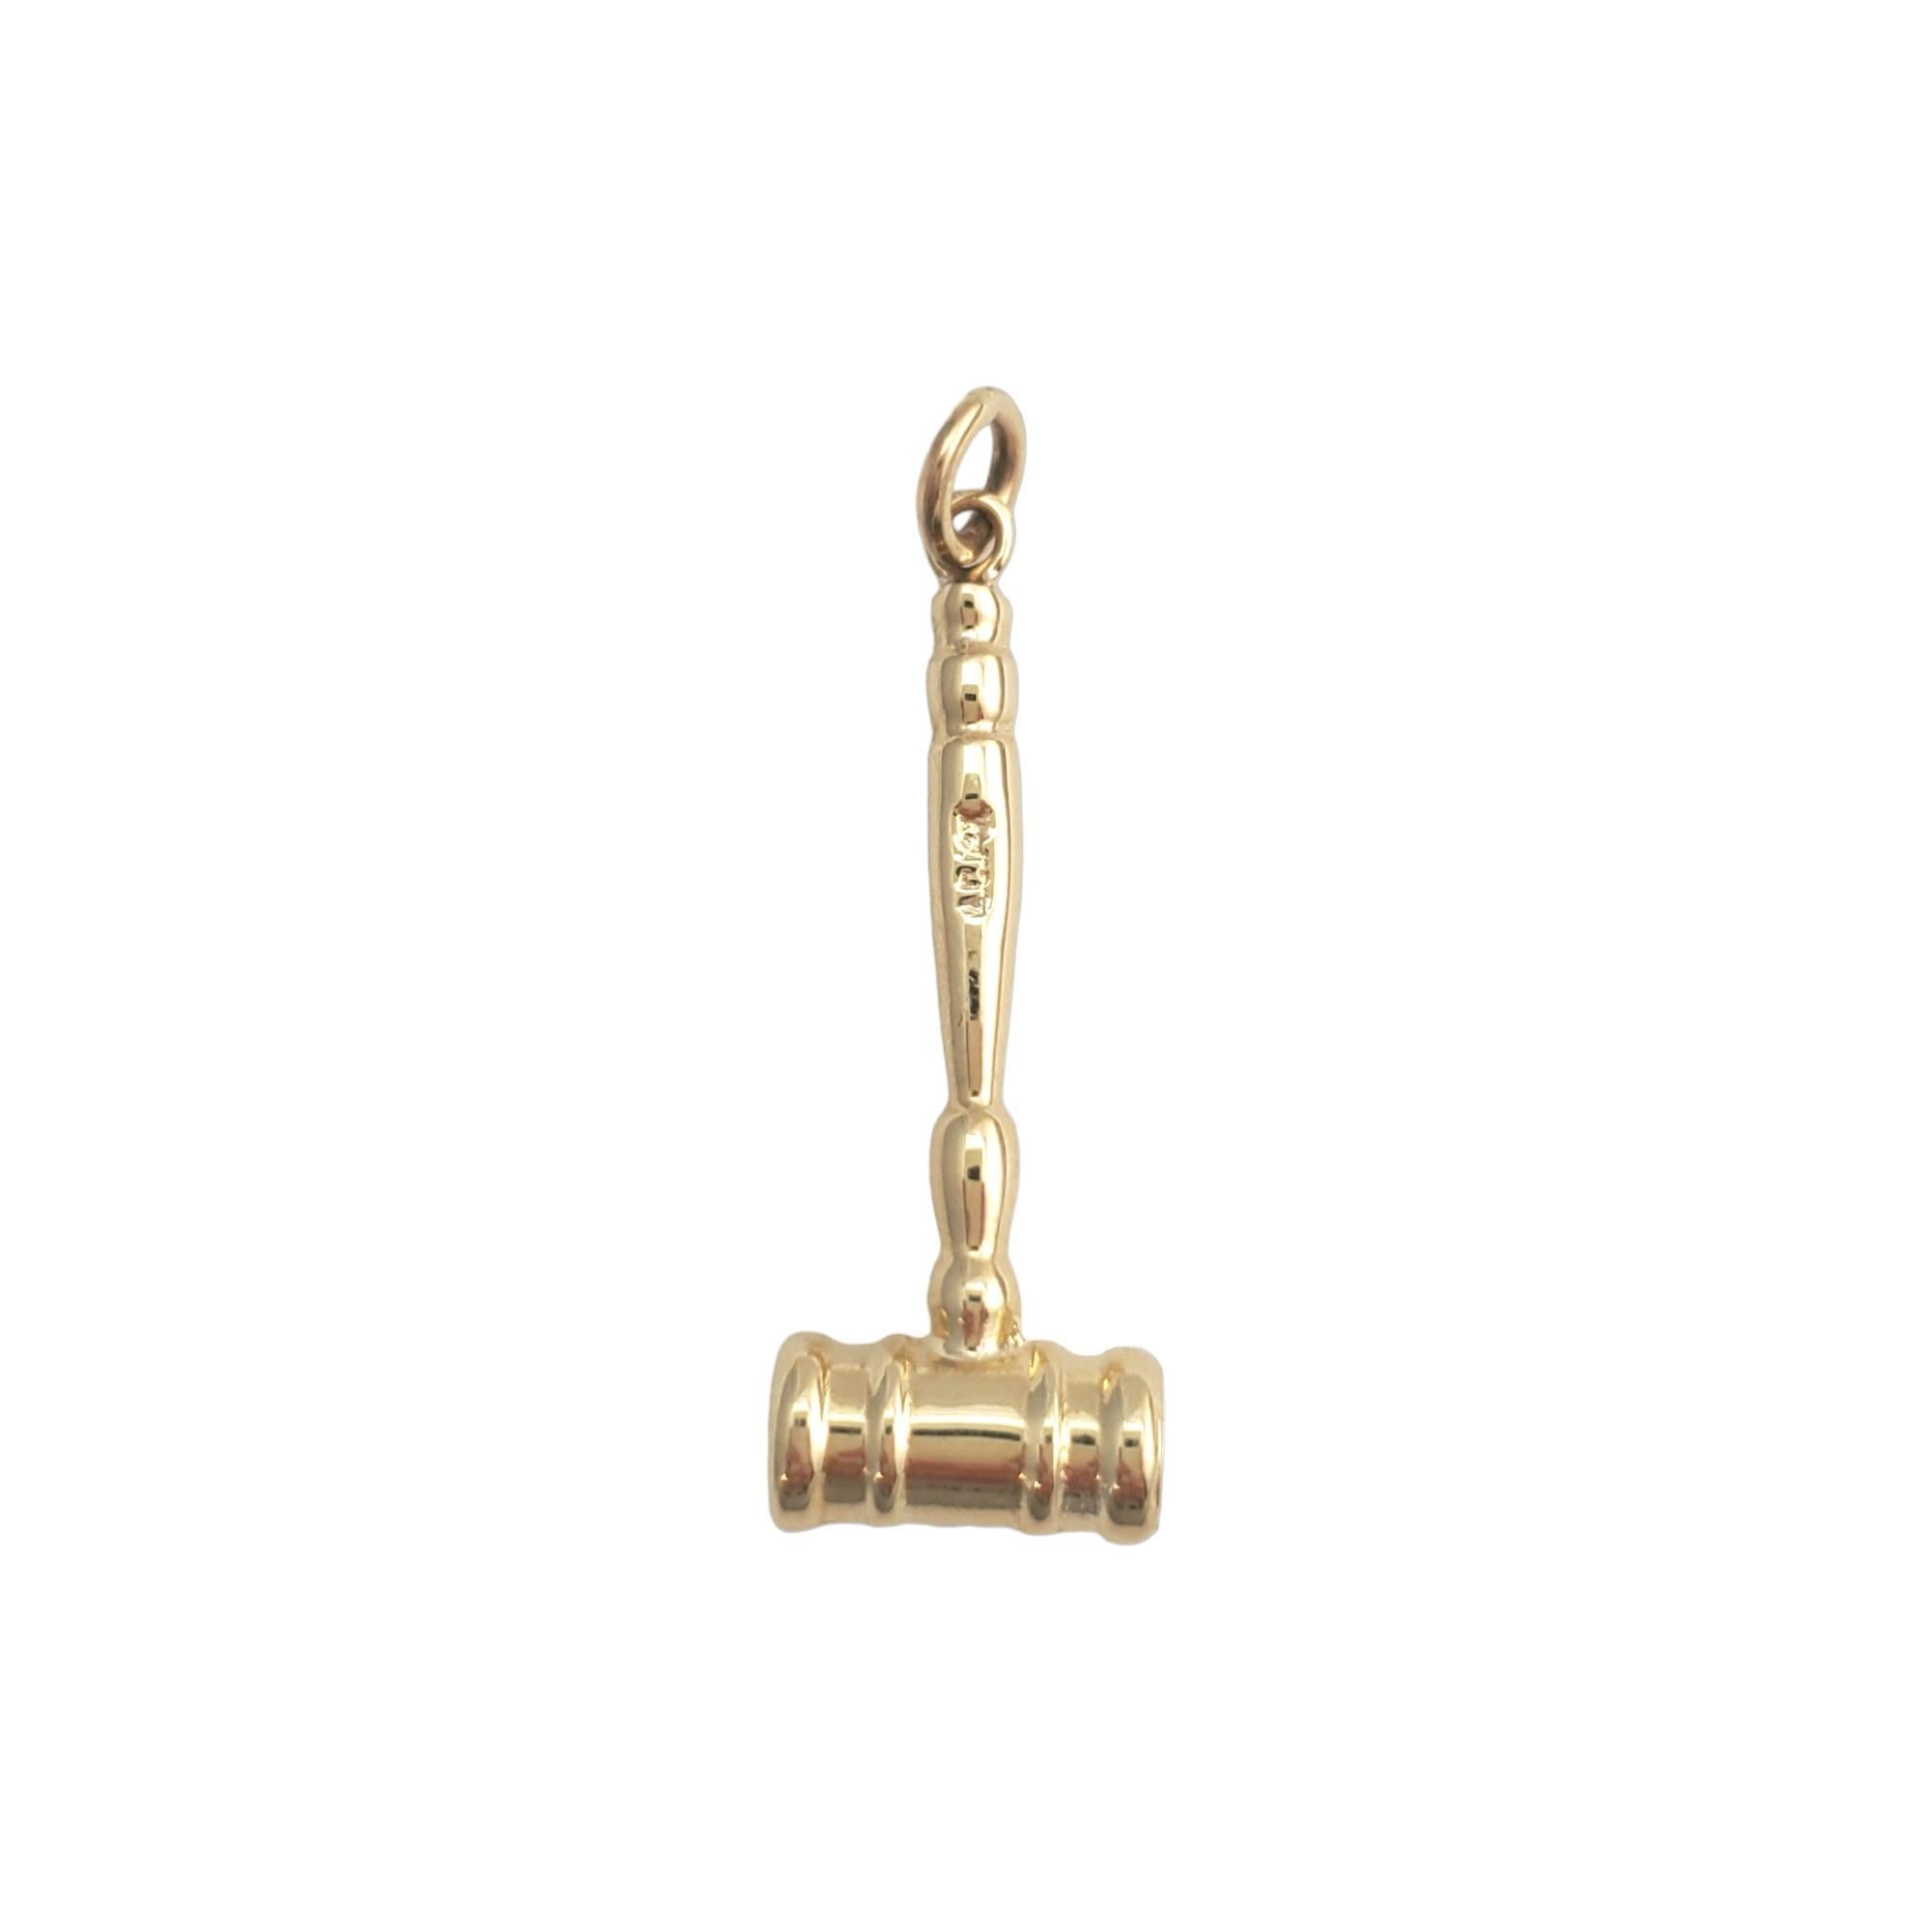 Vintage 14 karat yellow gold gavel pendant -

This lovely gavel pendant is a symbol of justice in a stylish design and is set in beautifully detailed 14K yellow gold.

Size: 31.77mm x 11.48mm

Stamped: 14K

Weight: 3.08 gr./ 1.98 dwt.

Chain not